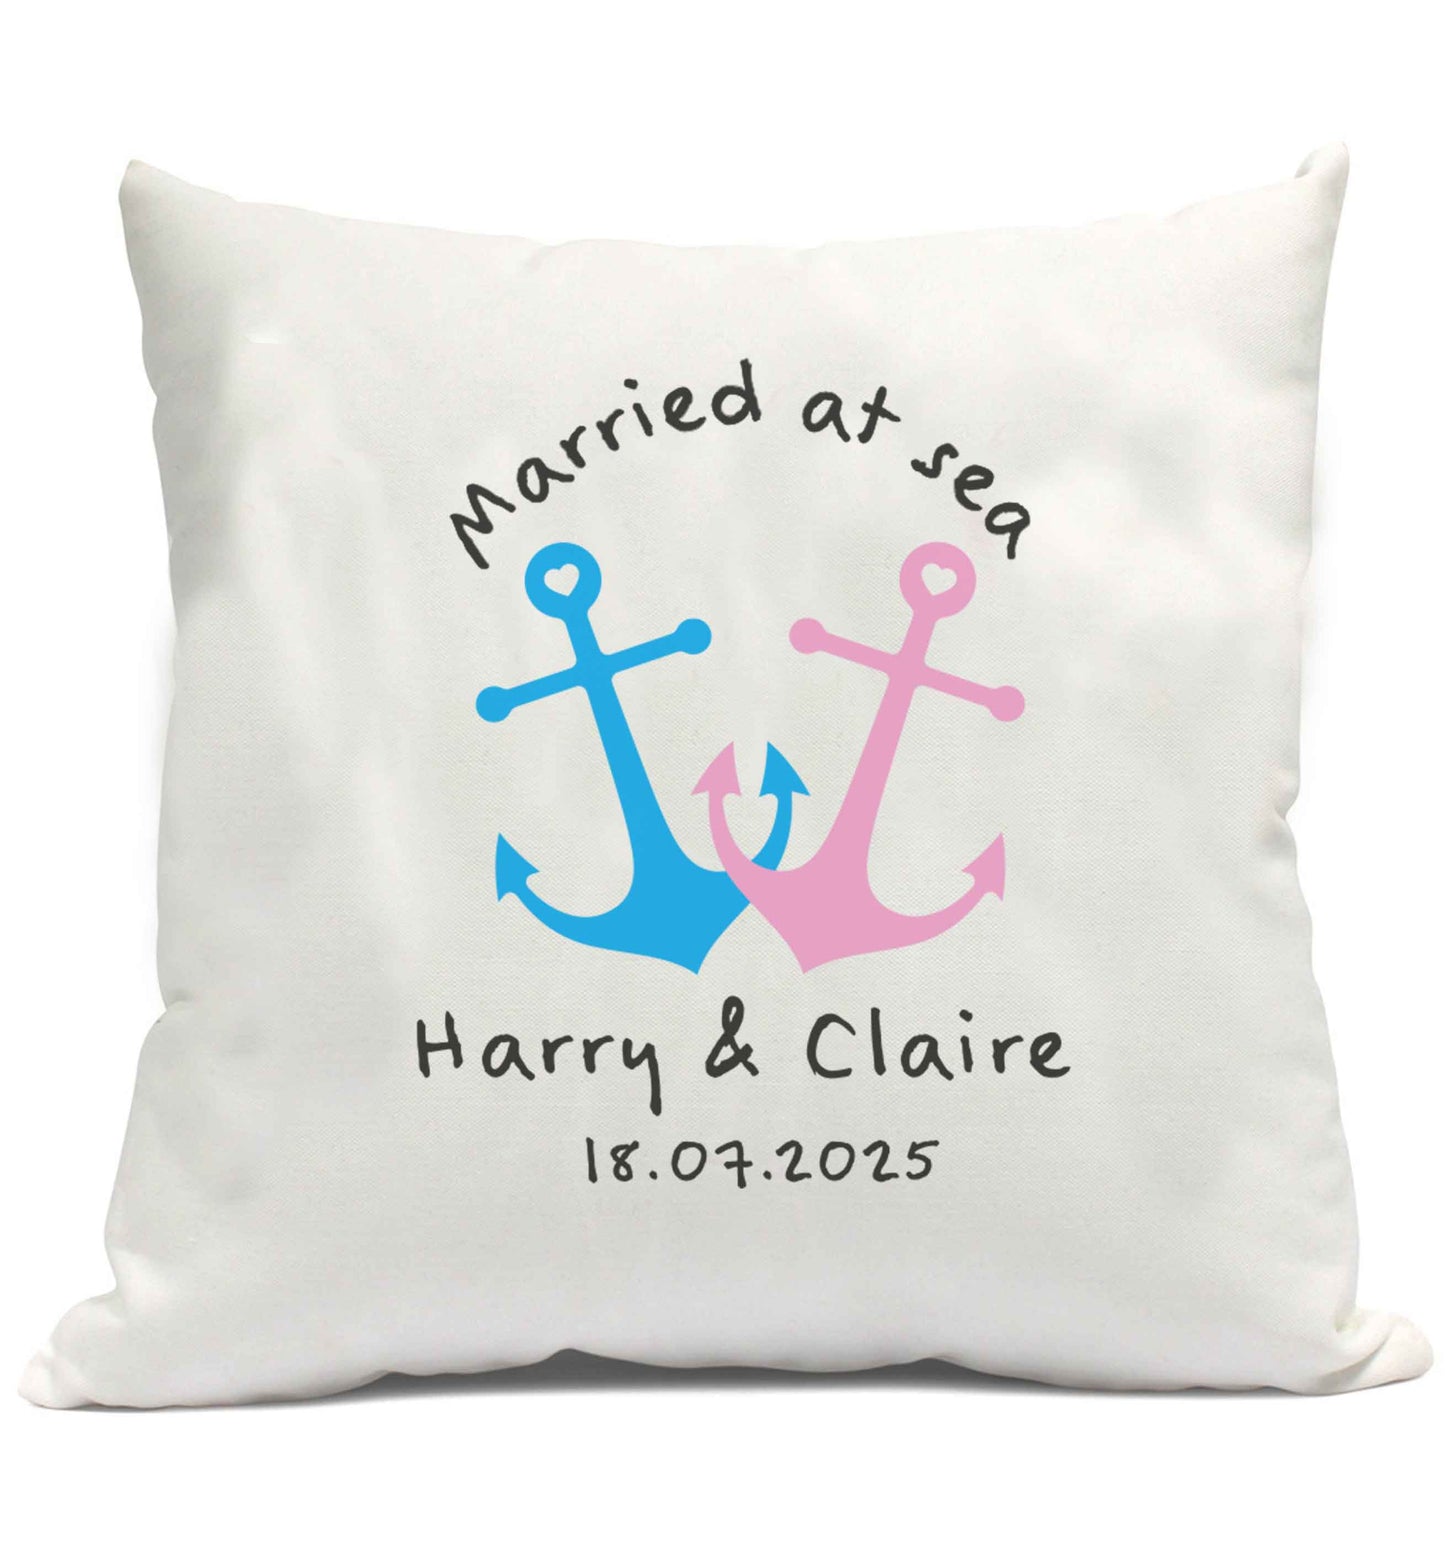 Married at sea cushion cover and filling